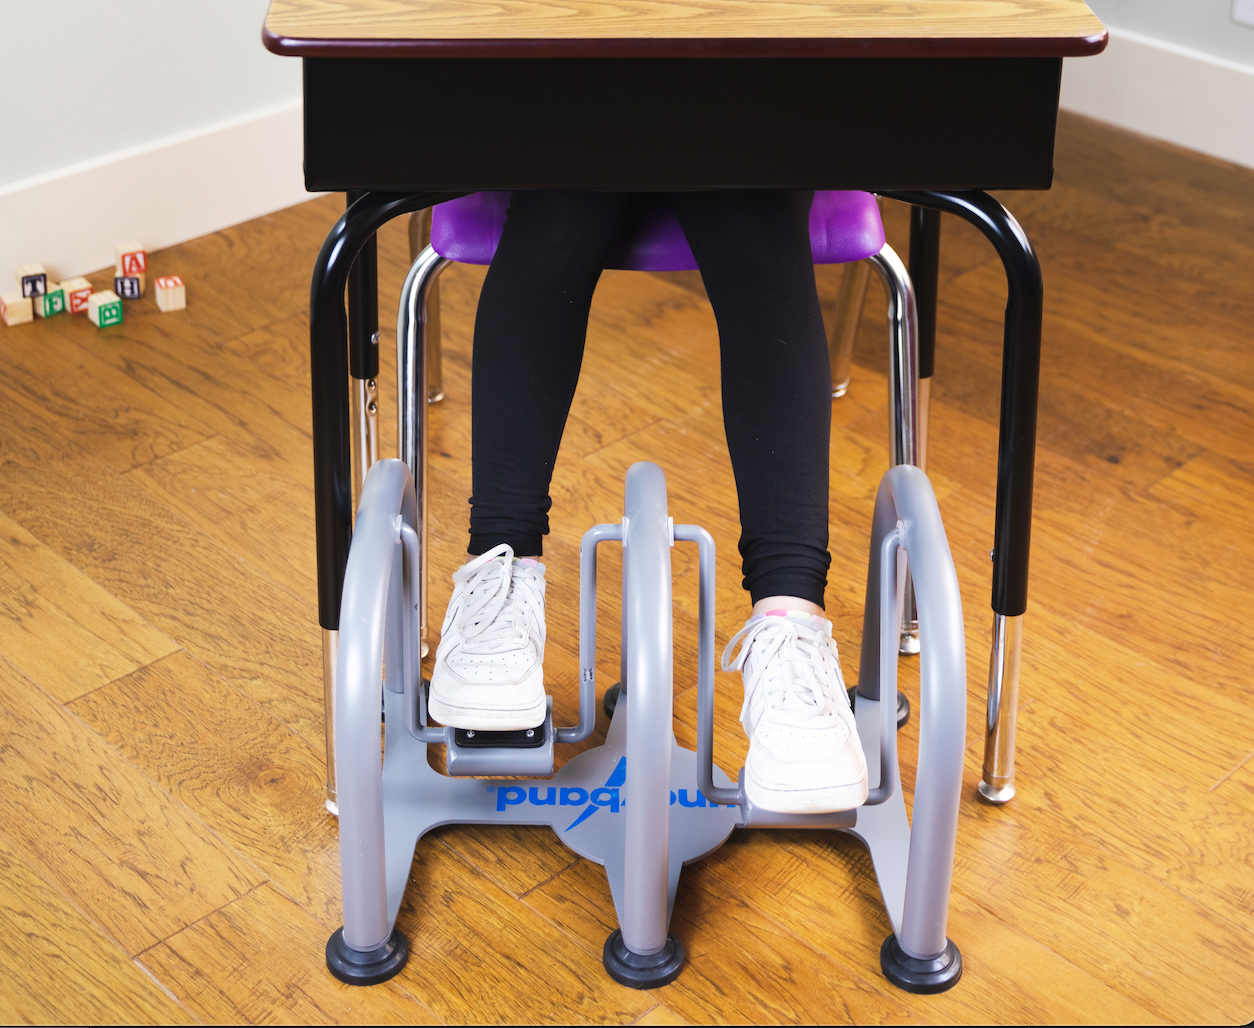 Dual Pedal Portable Foot Swing by Bouncyband®